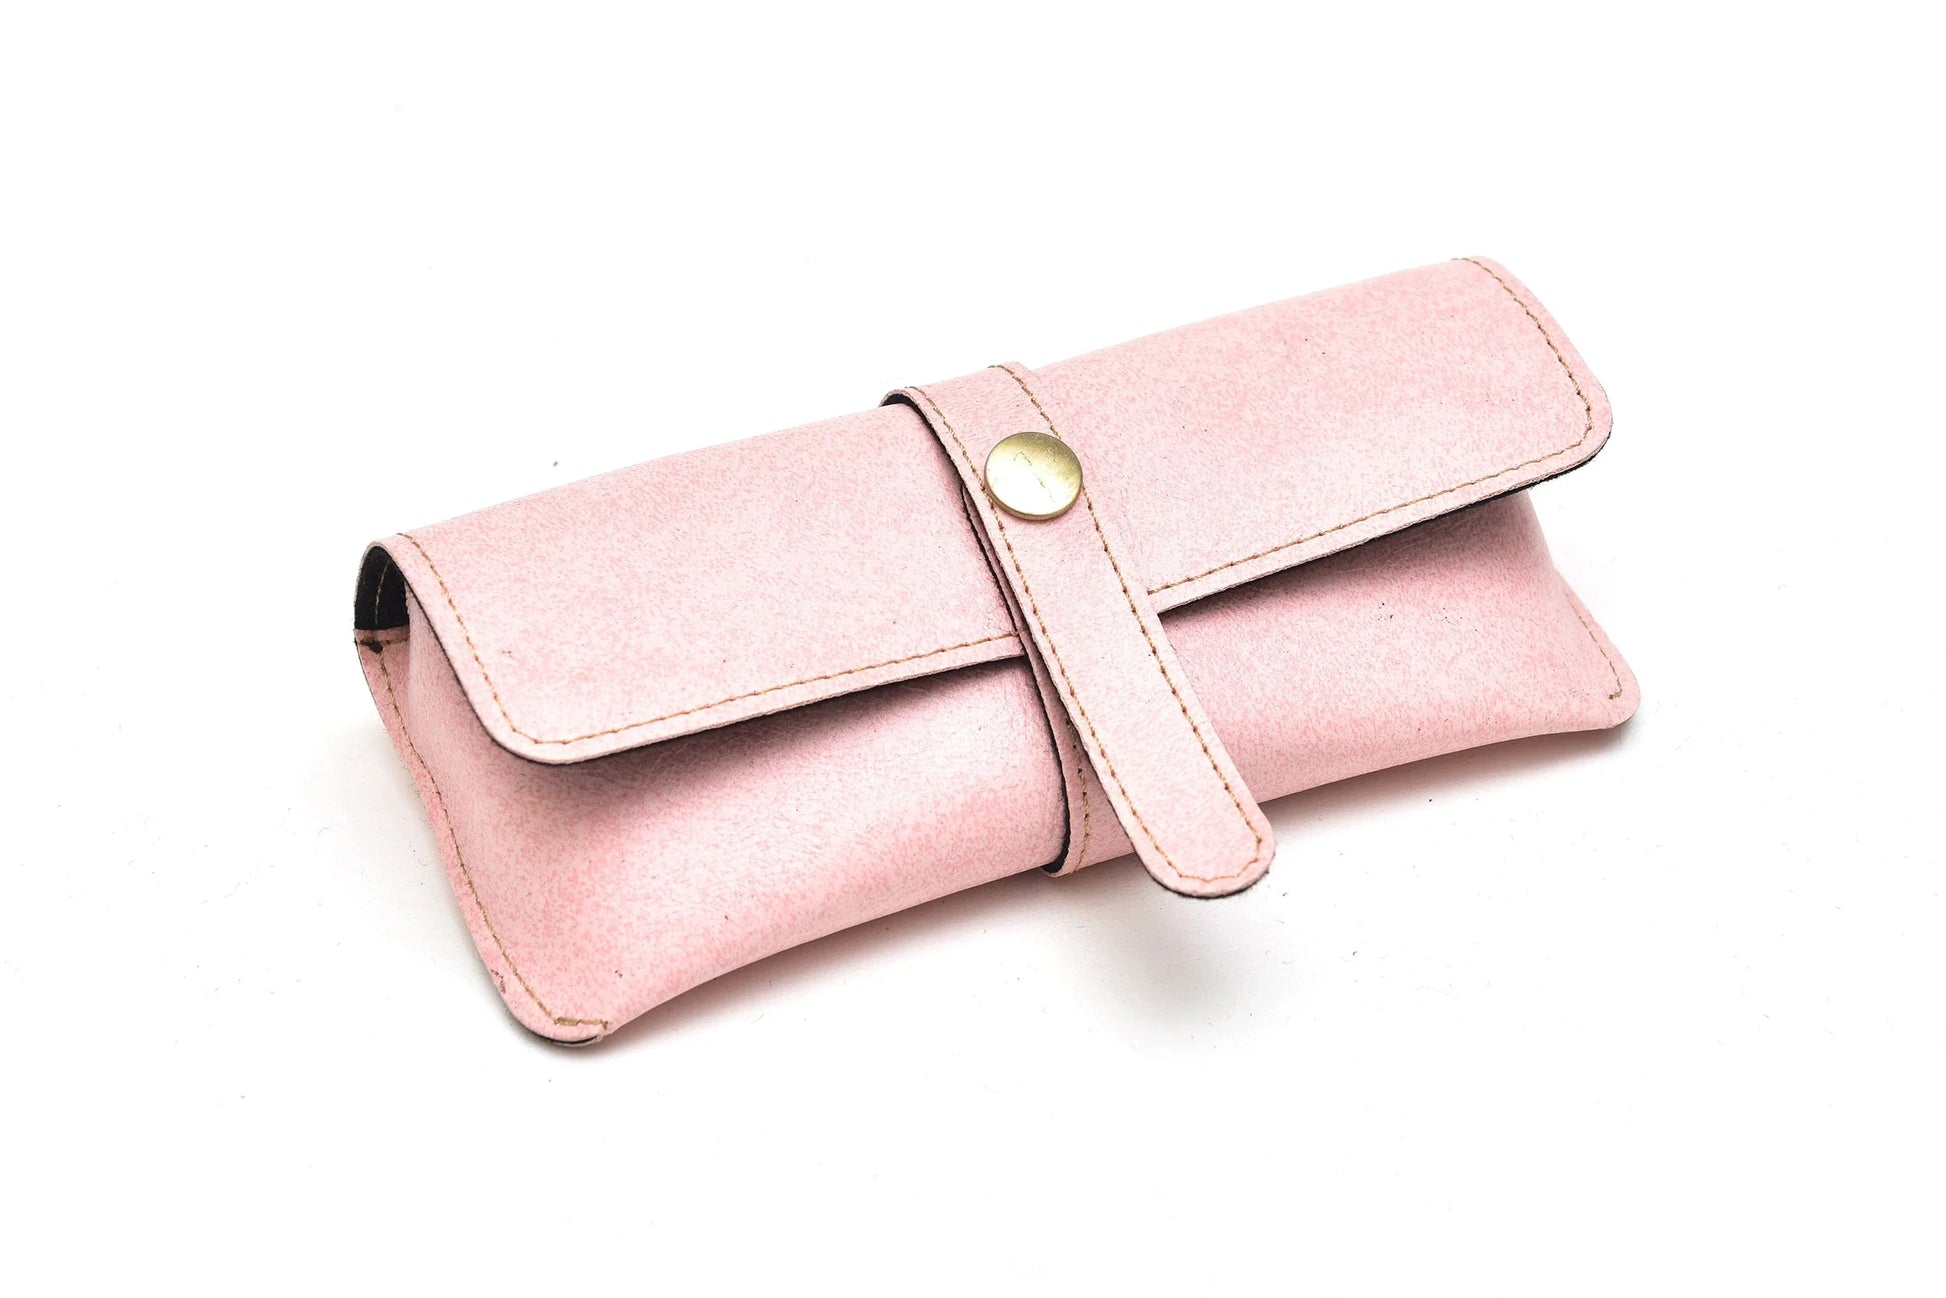 back view of customized sunglasses case- pink